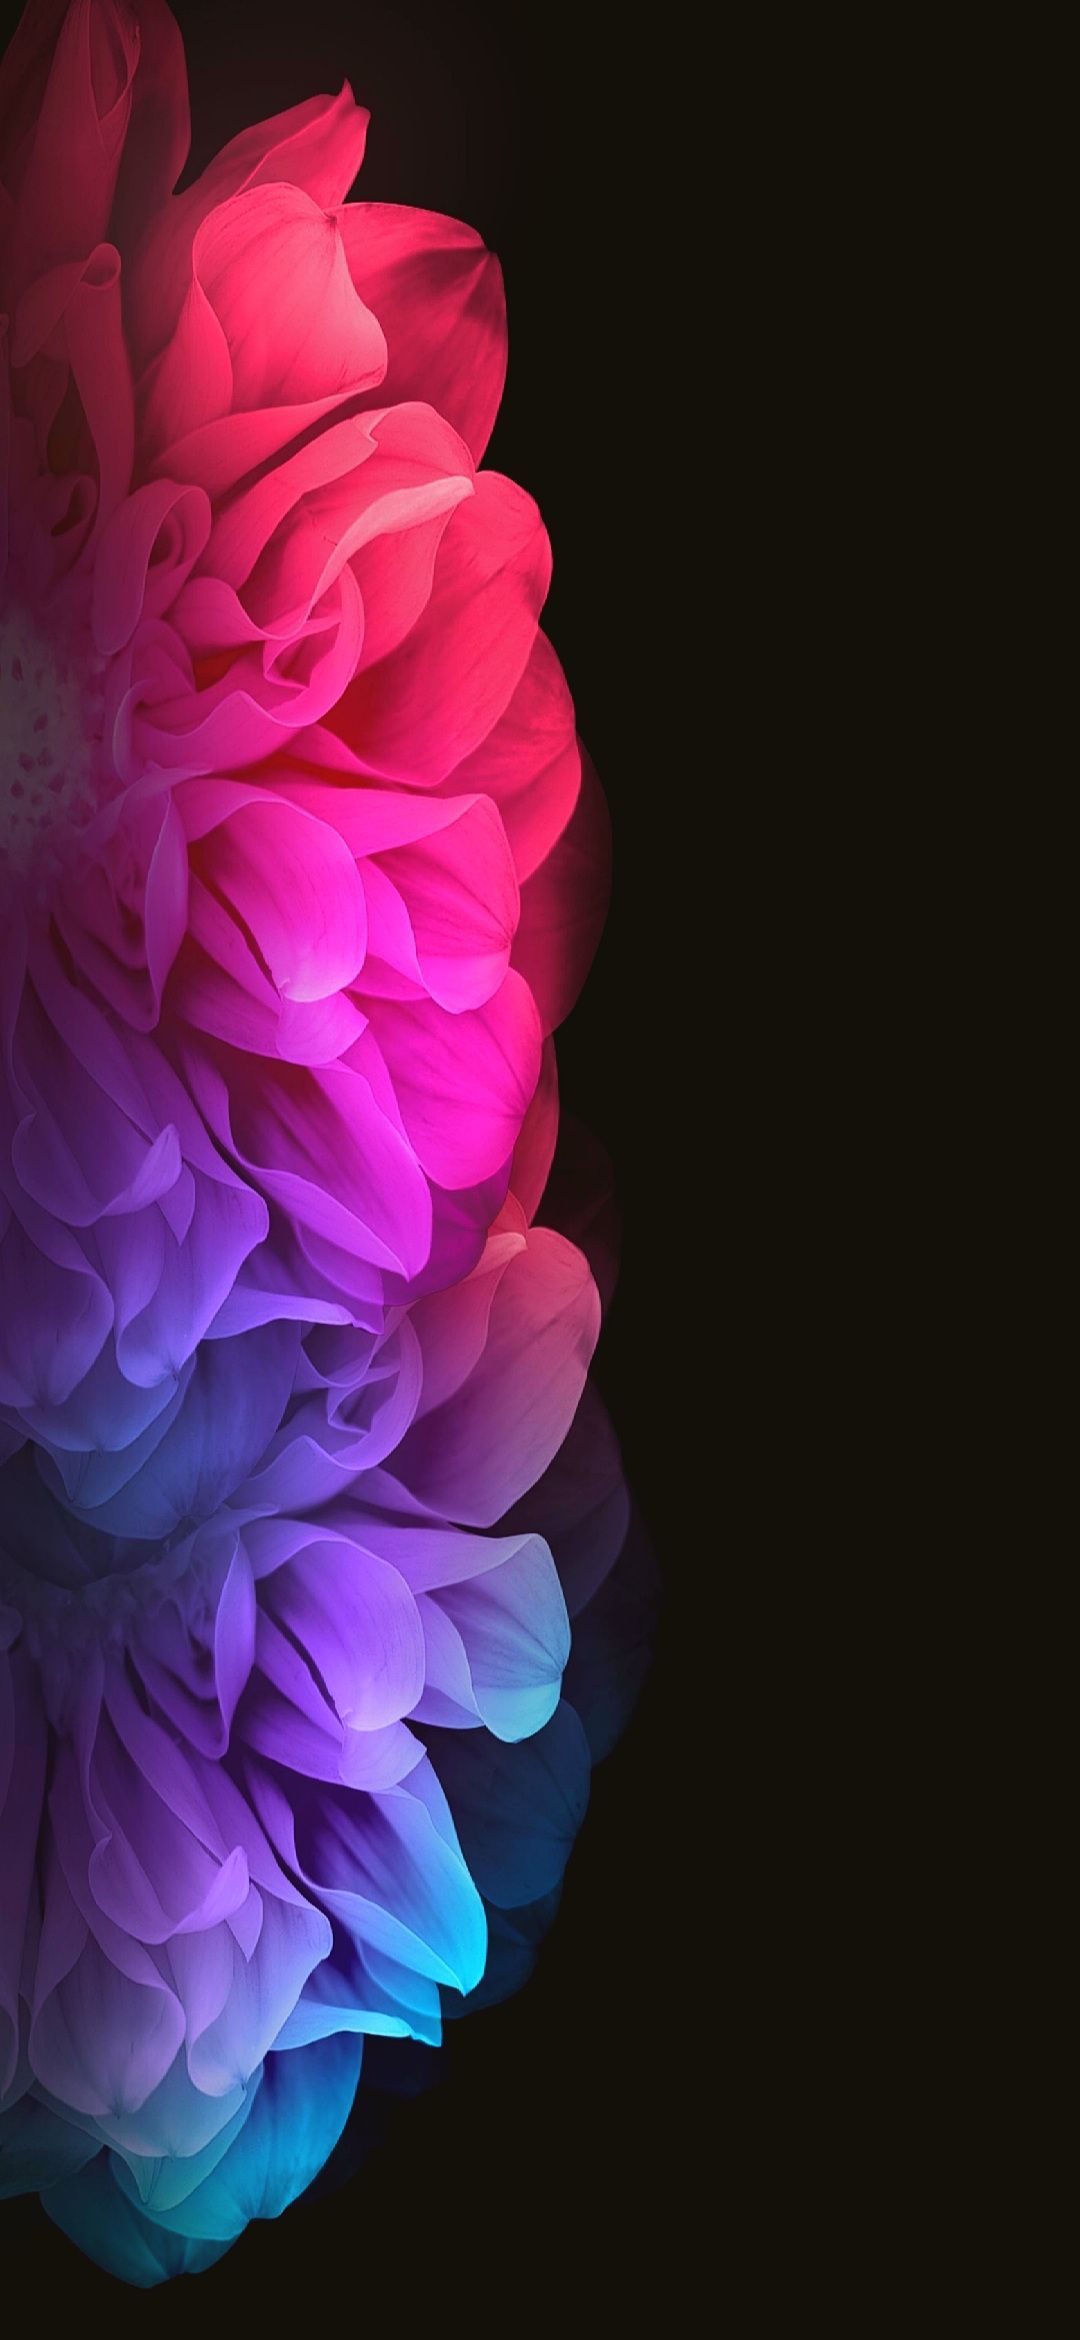 Flower Amoled Phone Wallpapers - Wallpaper Cave